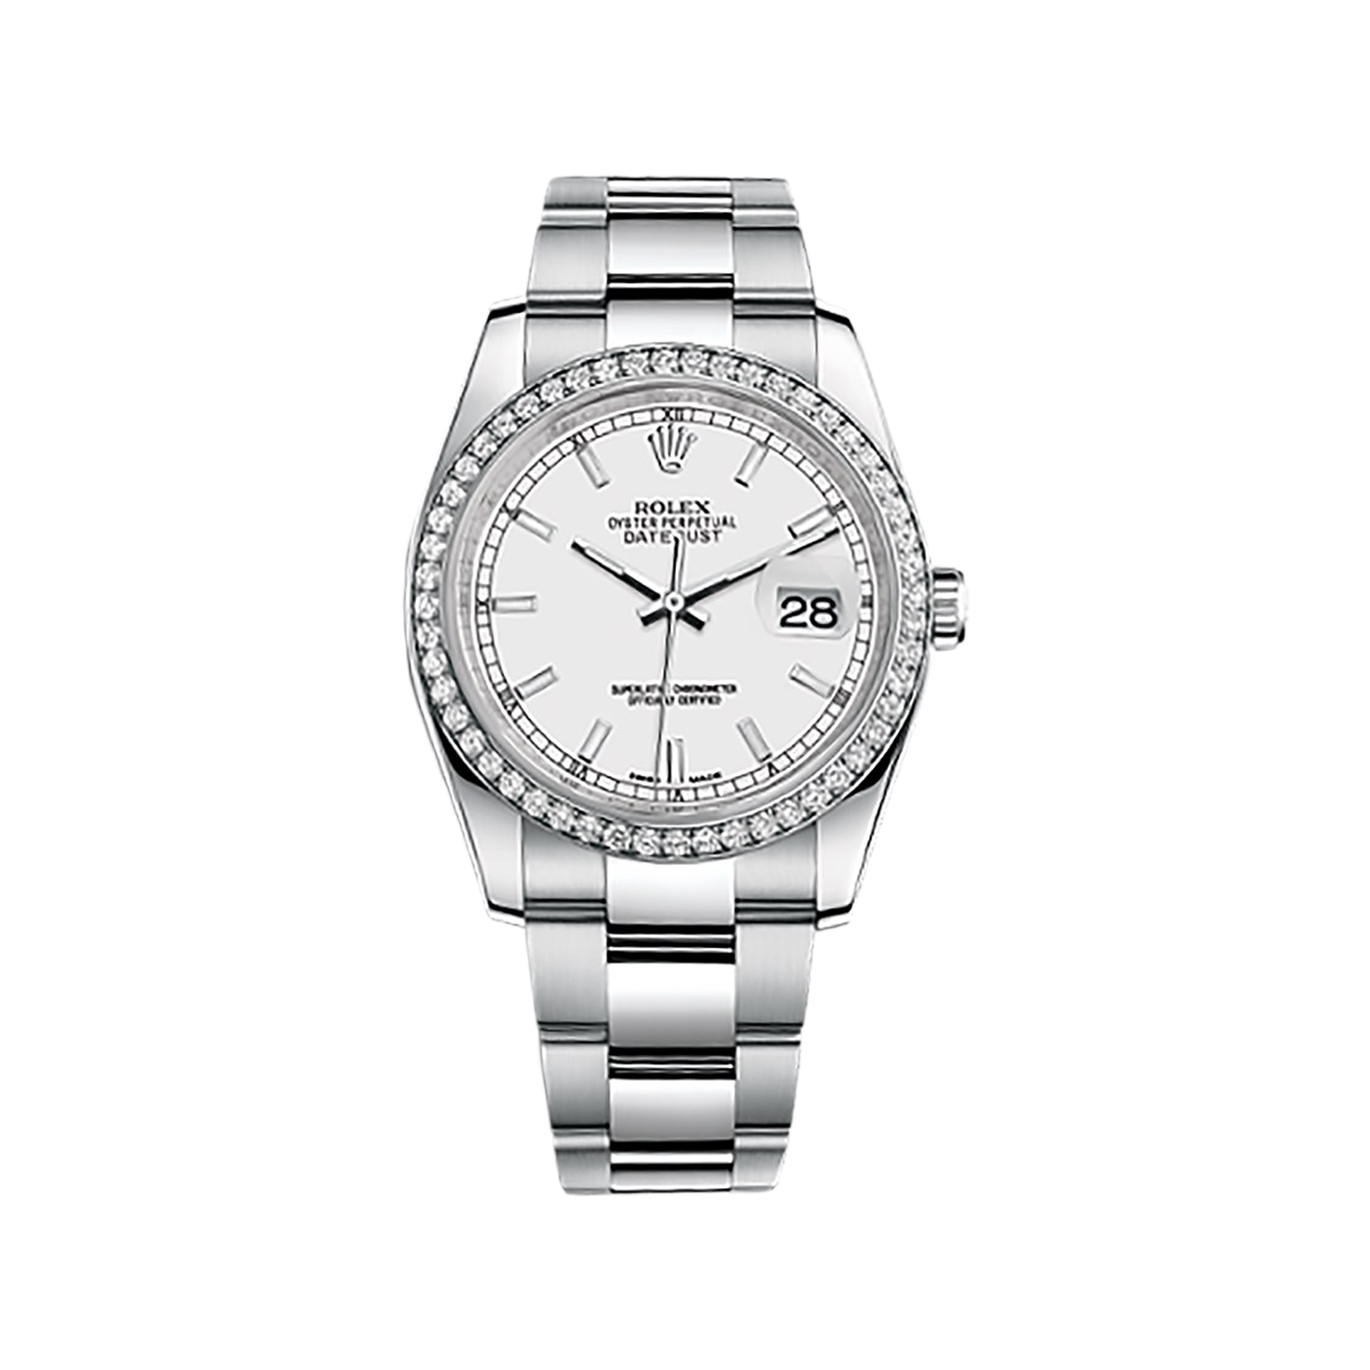 Datejust 36 116244 White Gold & Stainless Steel Watch (White)